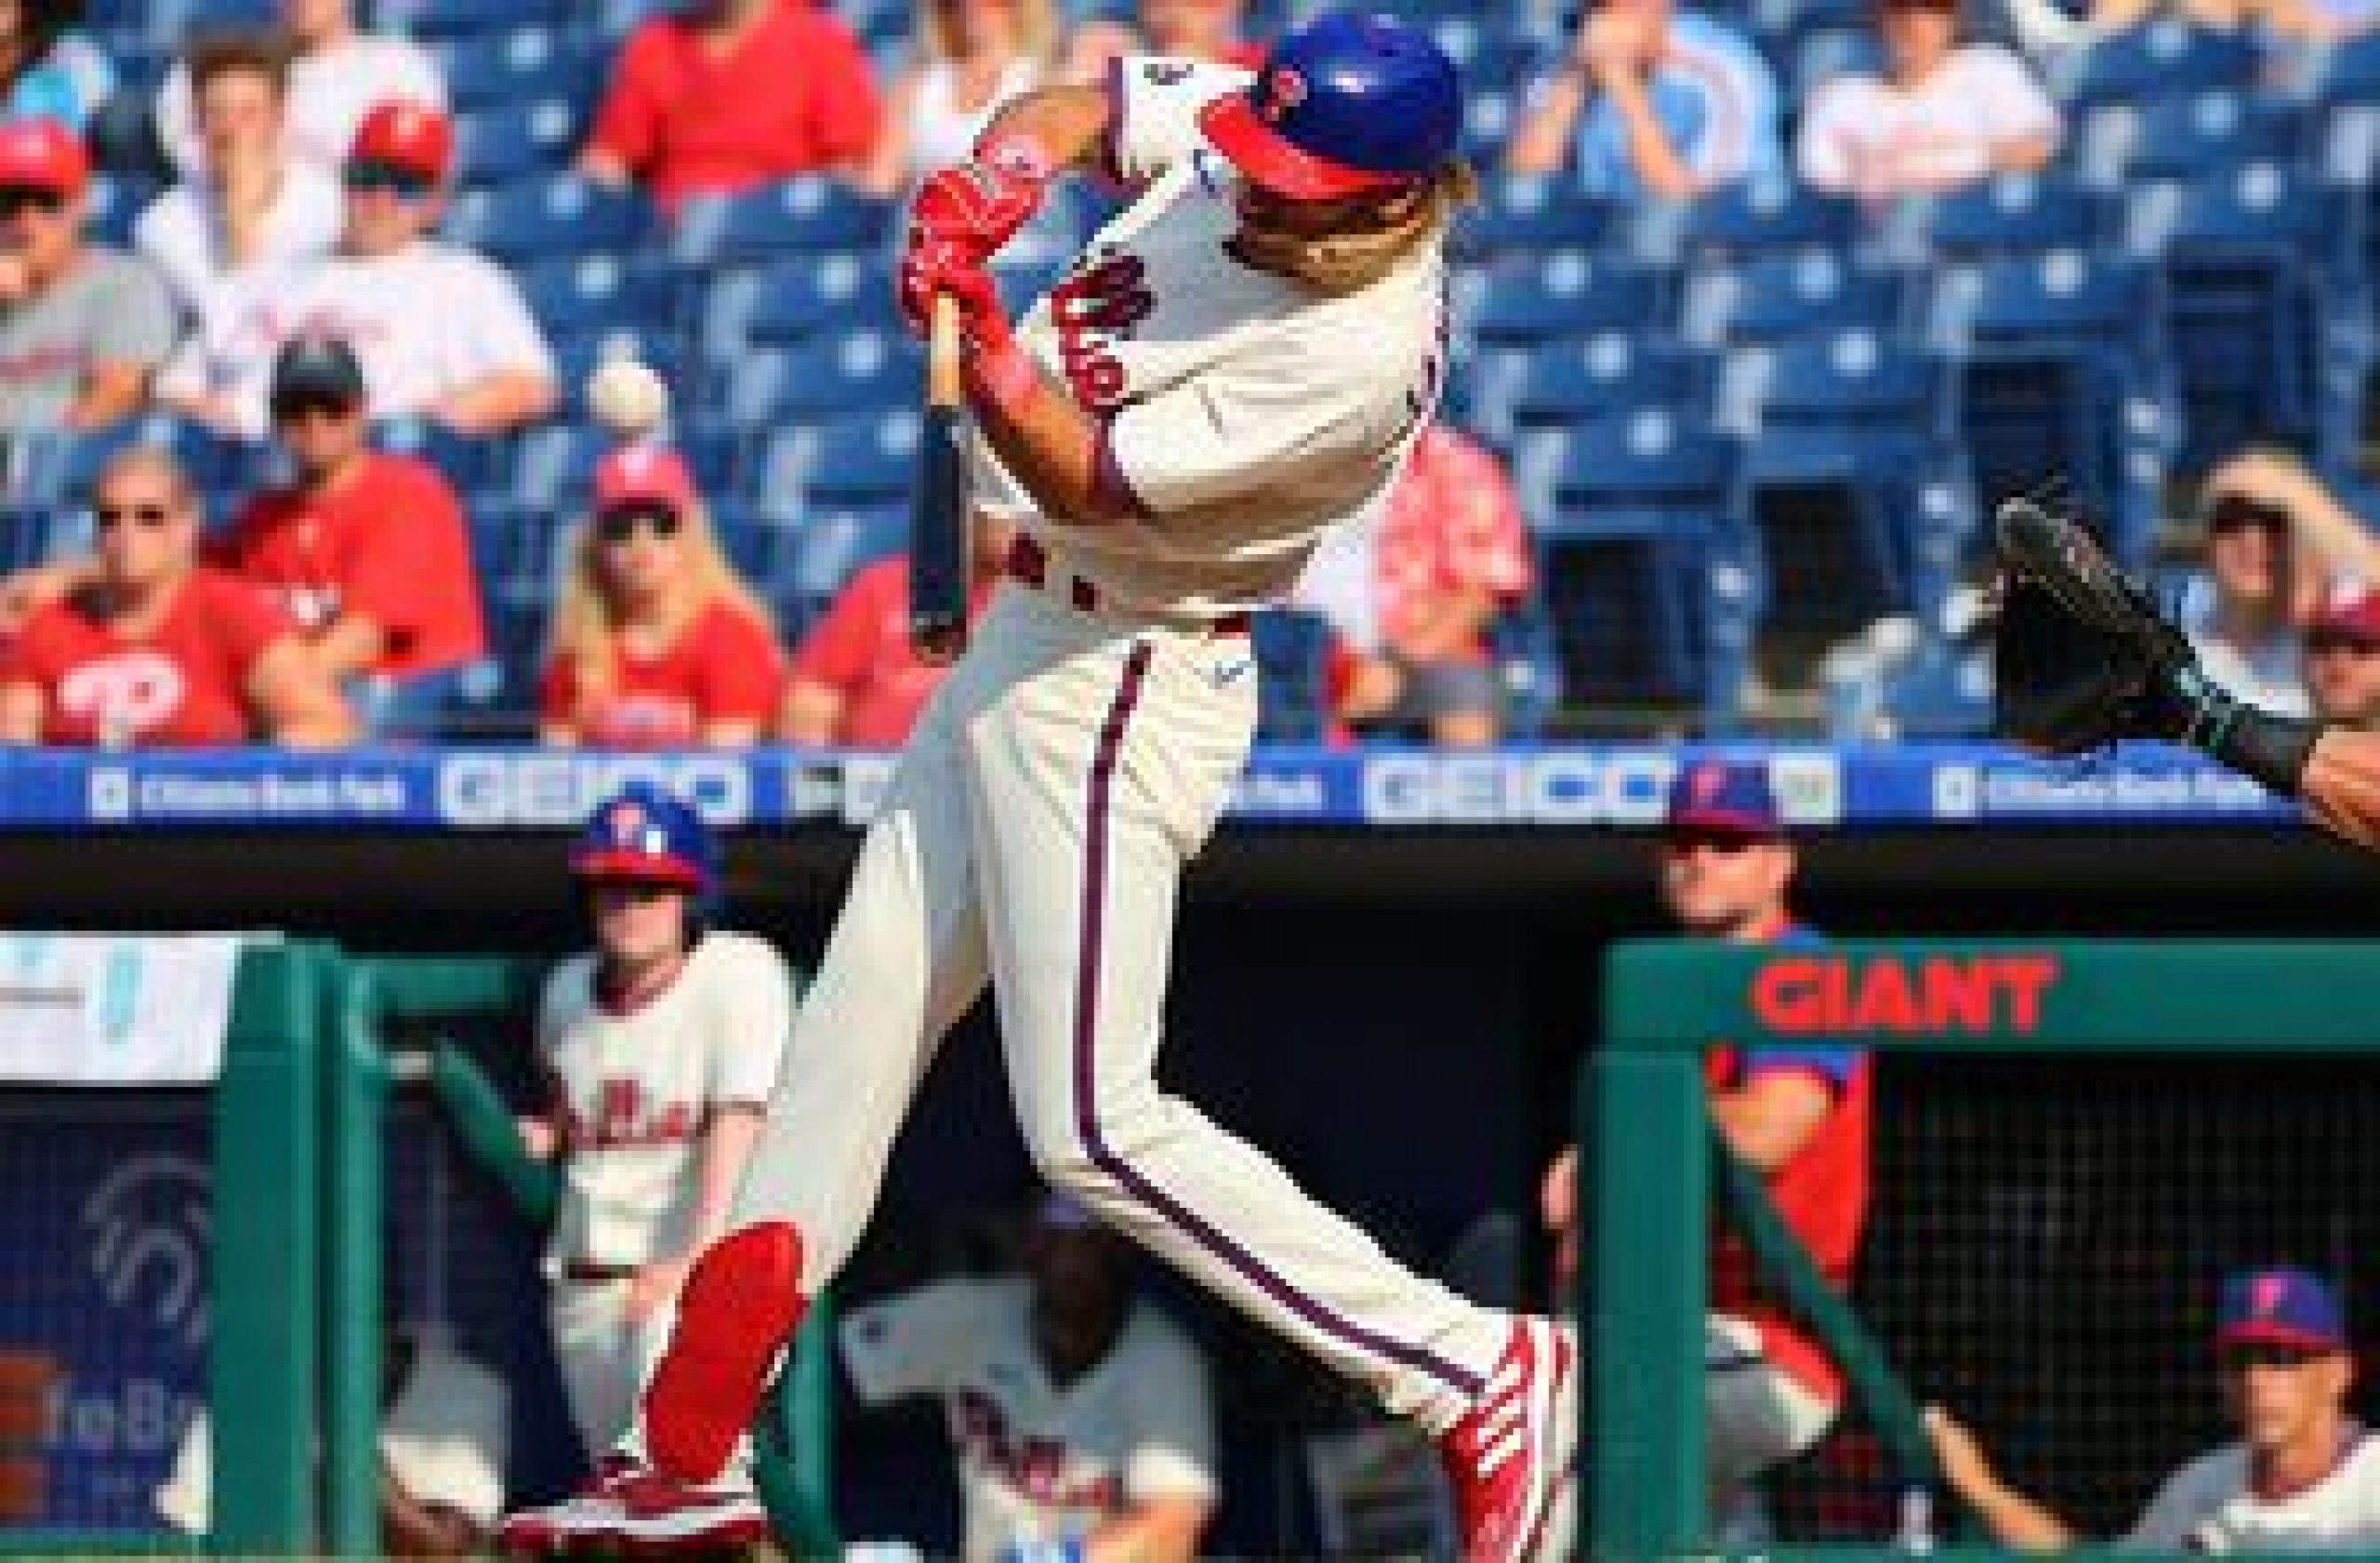 Phillies beat Marlins, 5-2, behind Travis Jankowski’s 3-for-3, four-RBI game